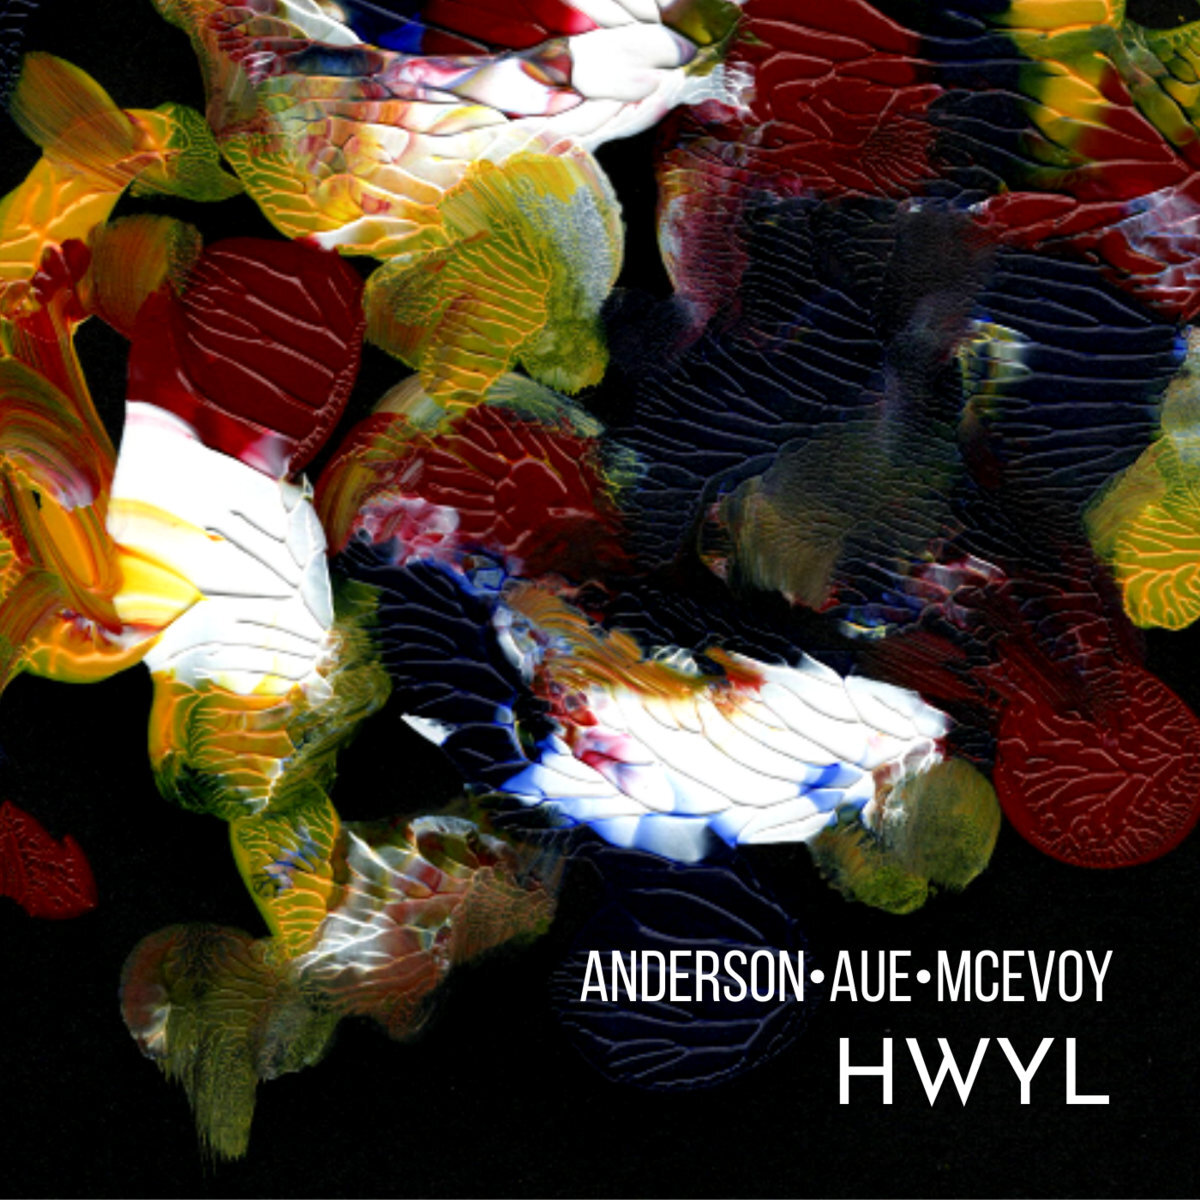 Anderson.Aue.McEvoy - "Hwyl" [Recorded, Mixed & Mastered (JP)]